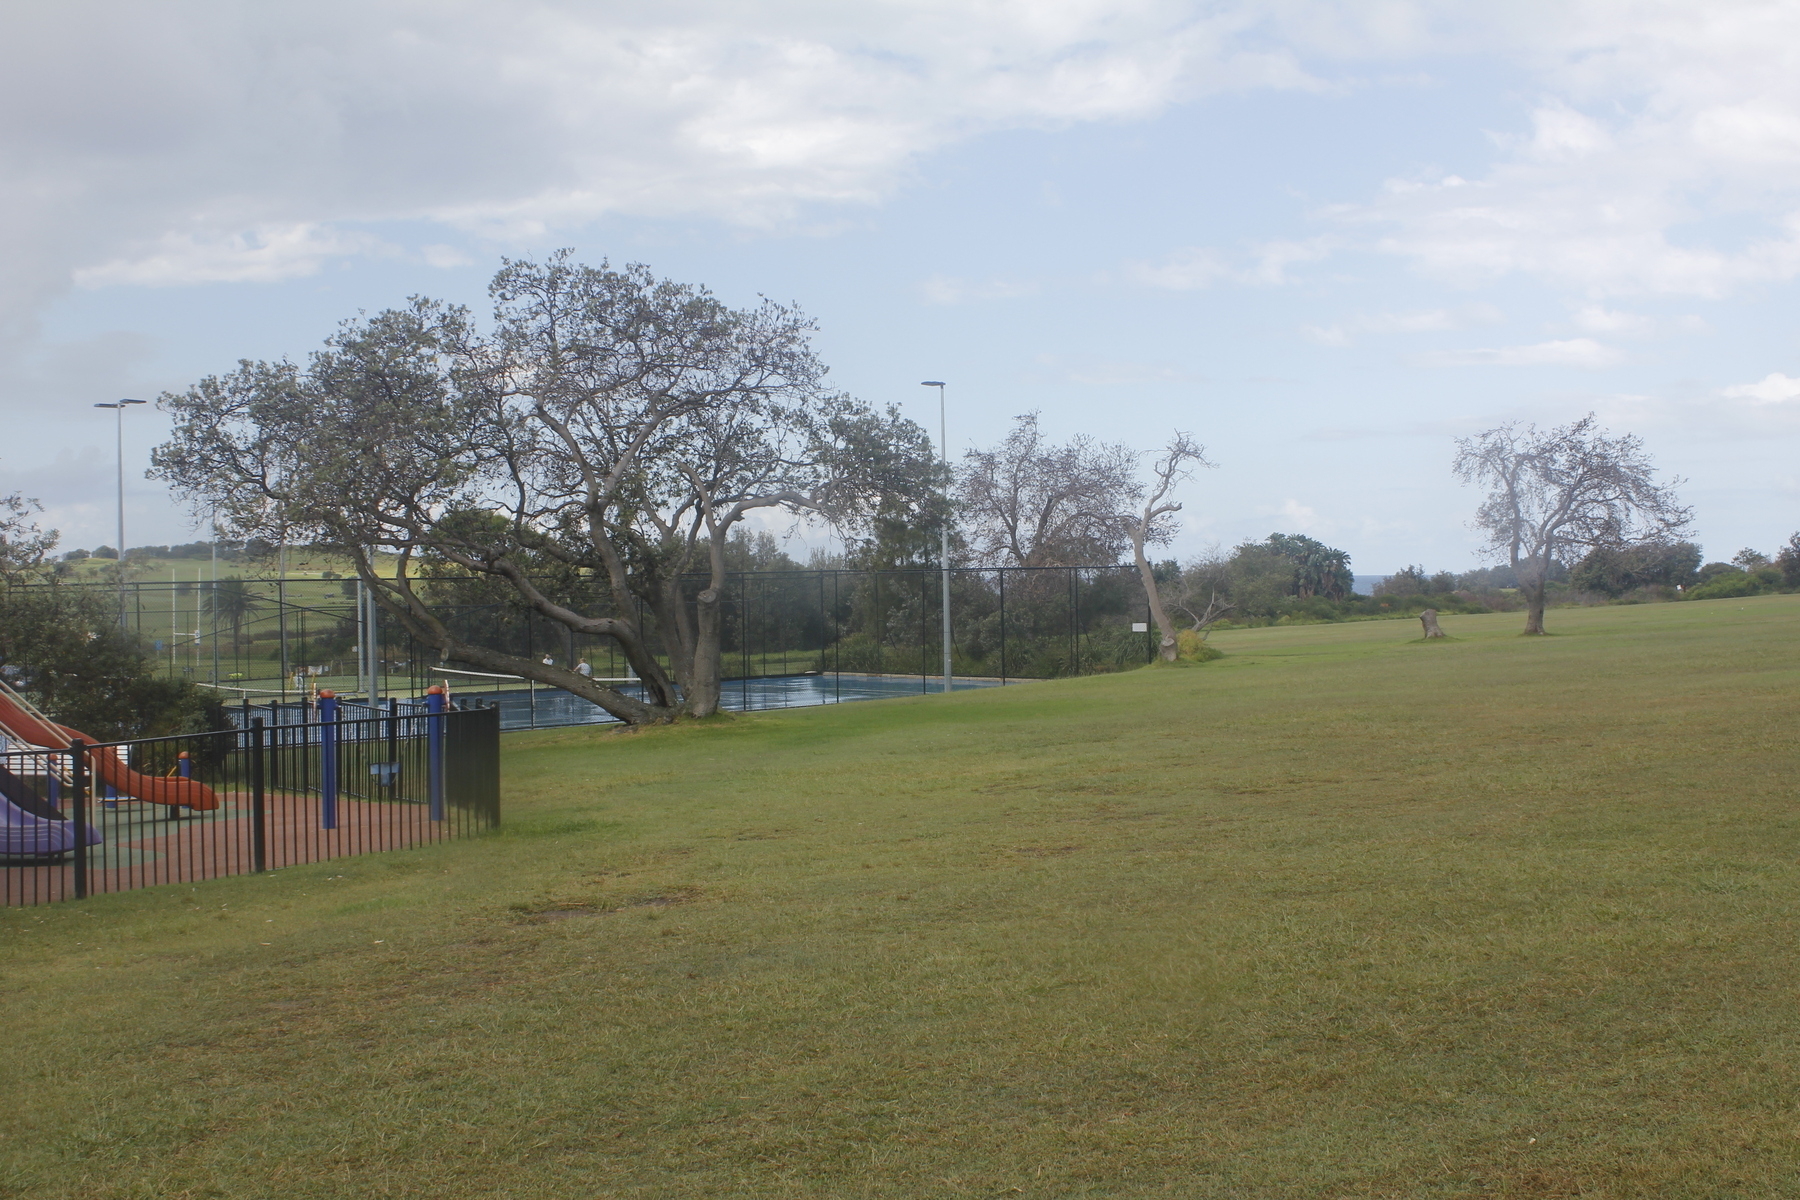 A big area of rain-wet grass begins in the foreground and extends to a line of wind-blown bushes in the distance. Three trees and a stump stand in the middle distance. In the left foreground is the corner of a children’s fenced-off play area, and just past that is a blue tennis court with a big, spreading tree overlooking it. The tennis court is wet and shiny from the rain. The sky is pale blue, with dark and light clouds.